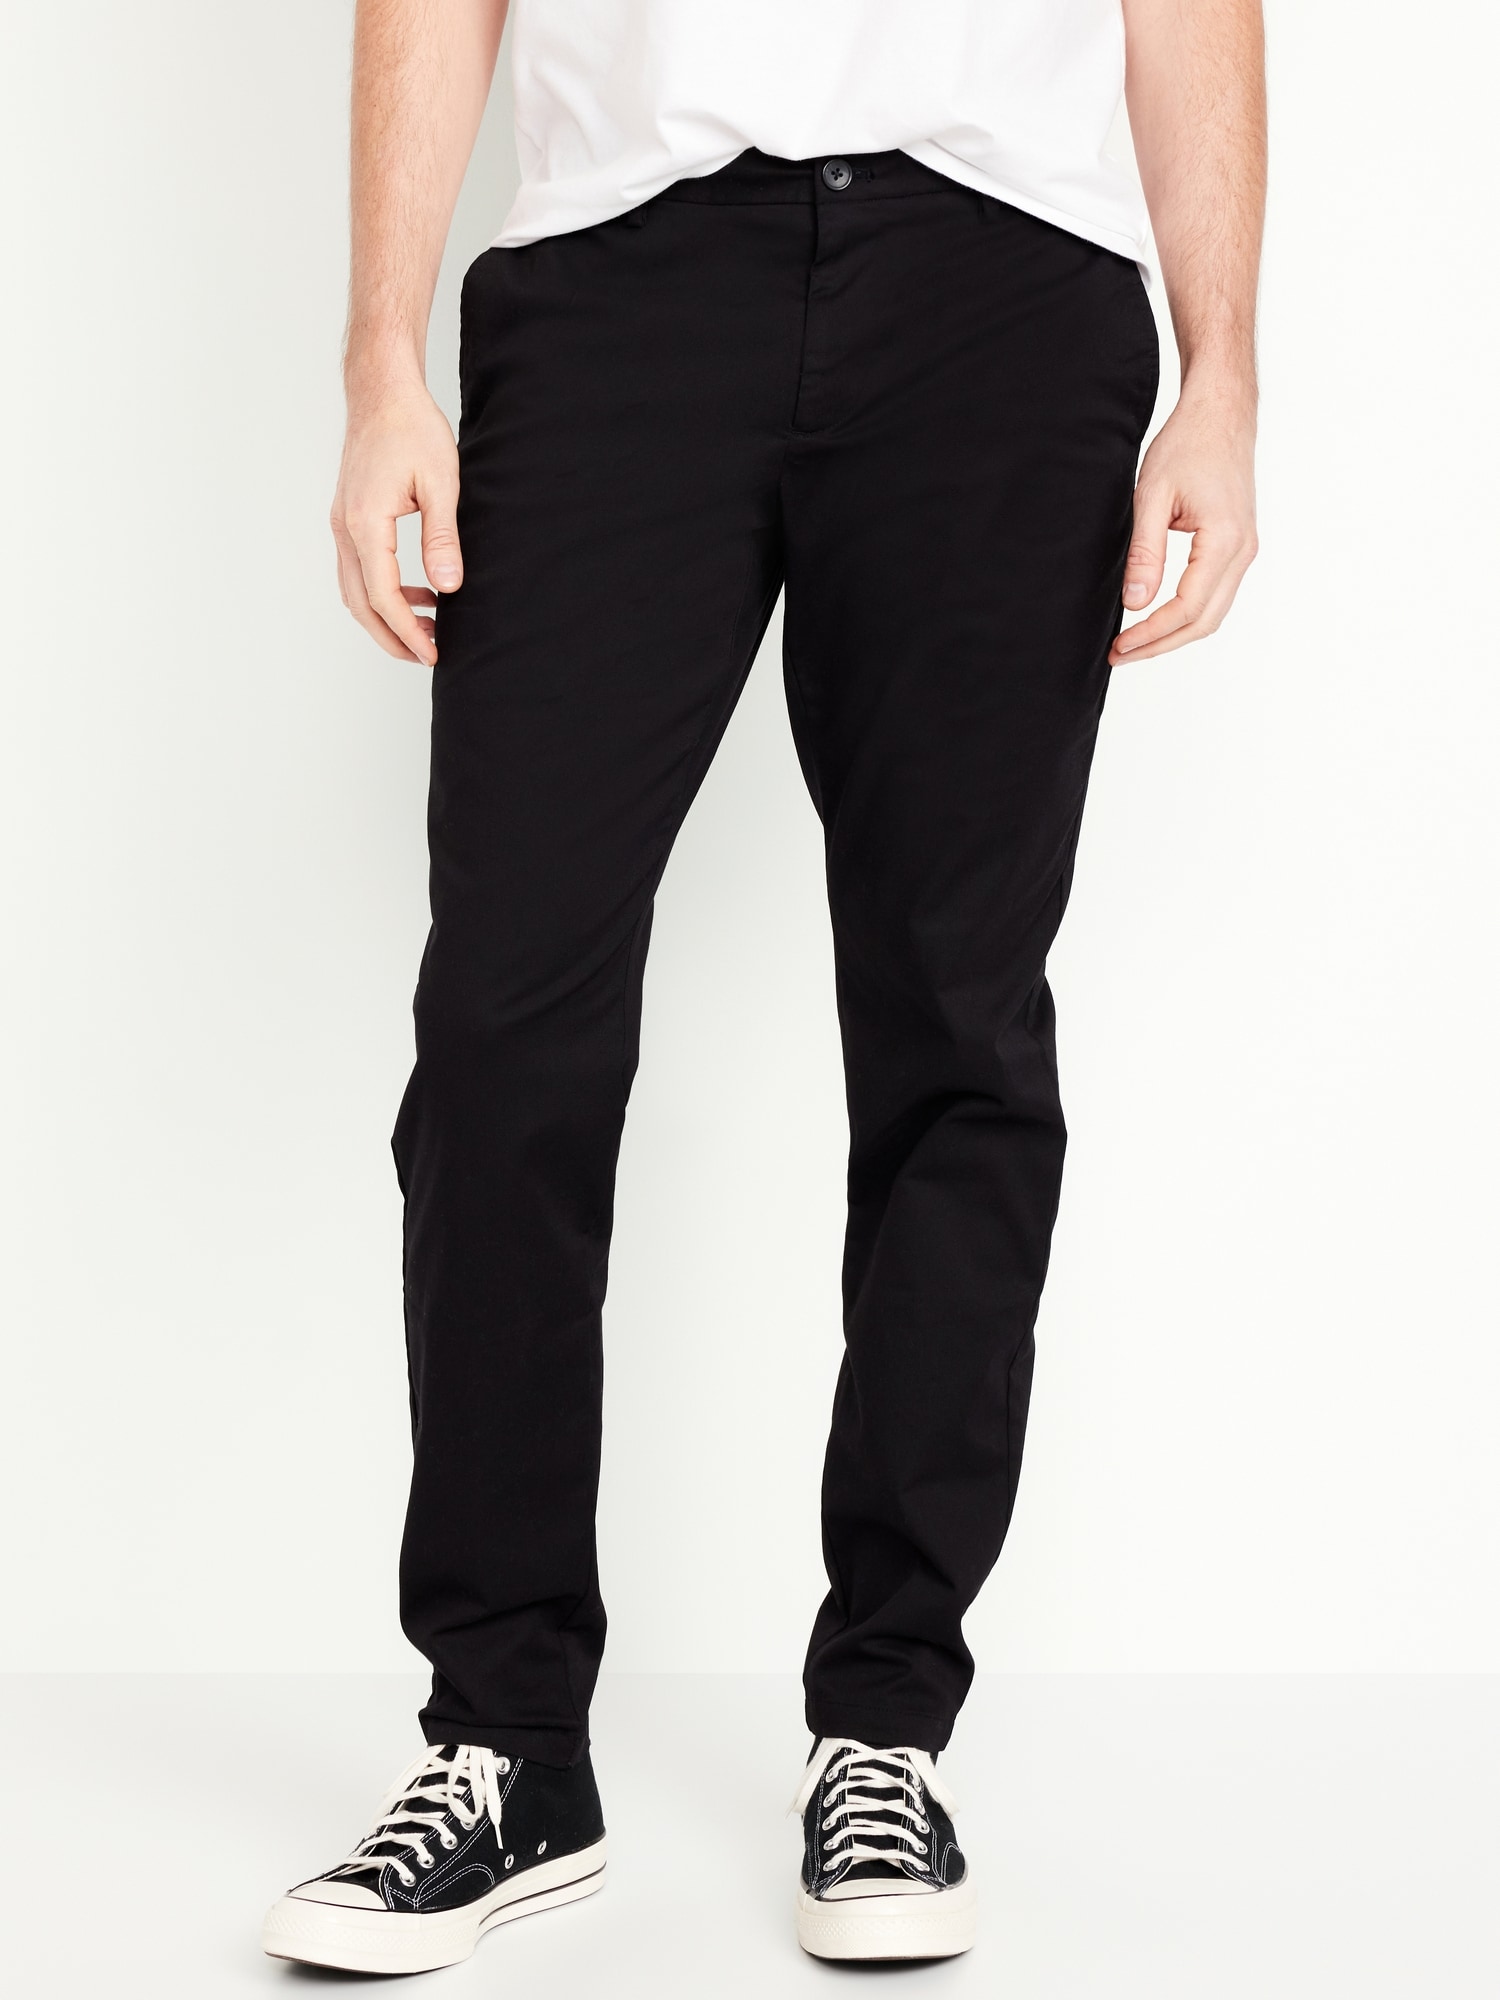 Athletic Ultimate Built-In Flex Chino Pants